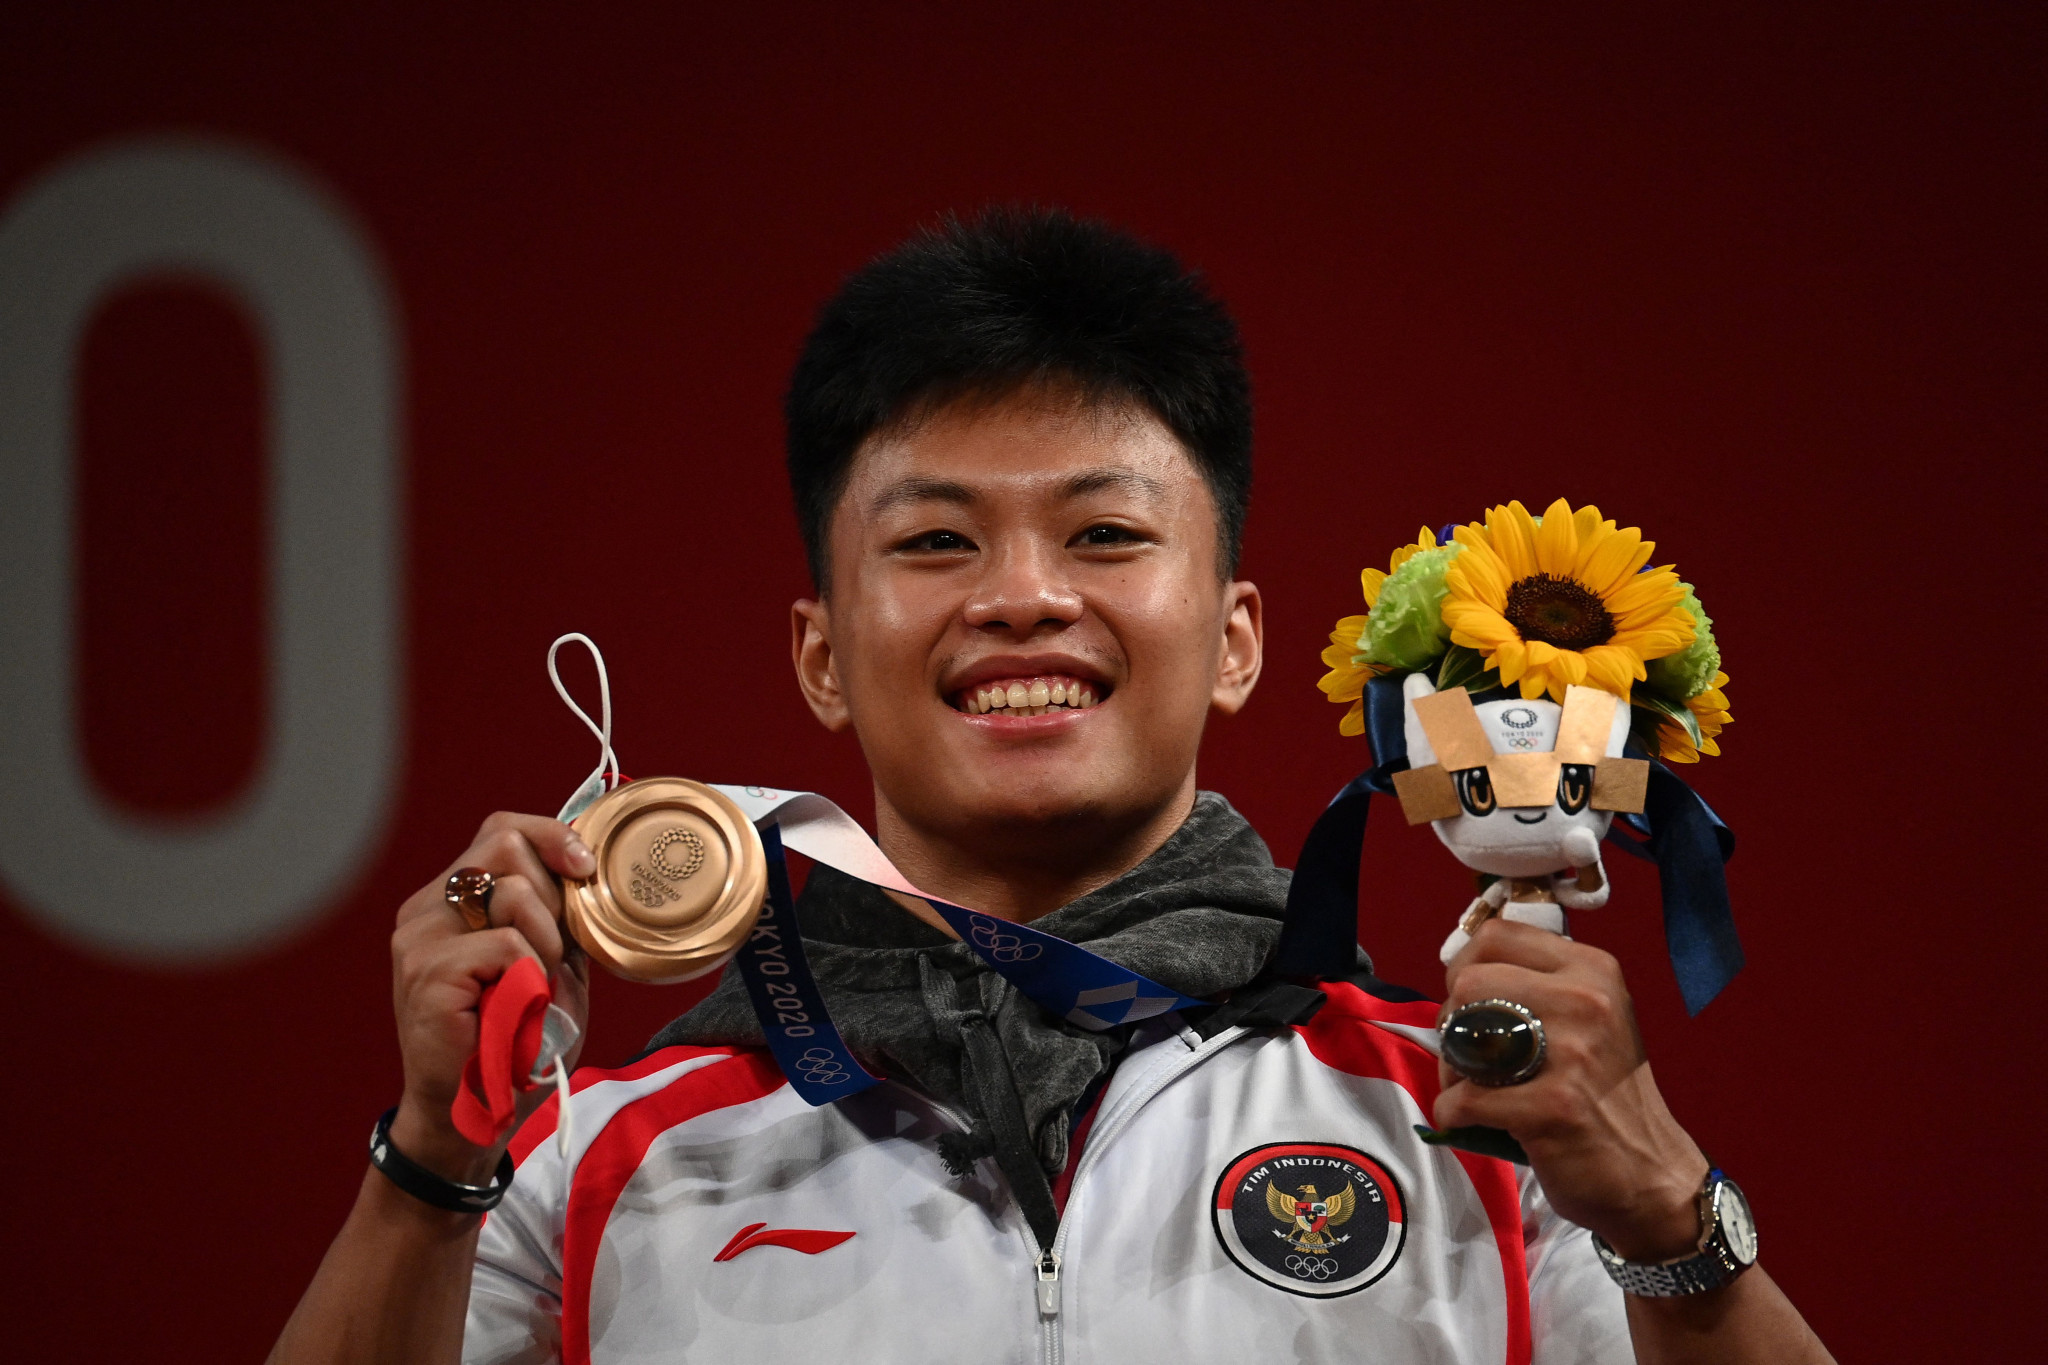 Erwin Abdullah Rahmat at the Tokyo 2020, where he won a bronze medal. GETTY IMAGES